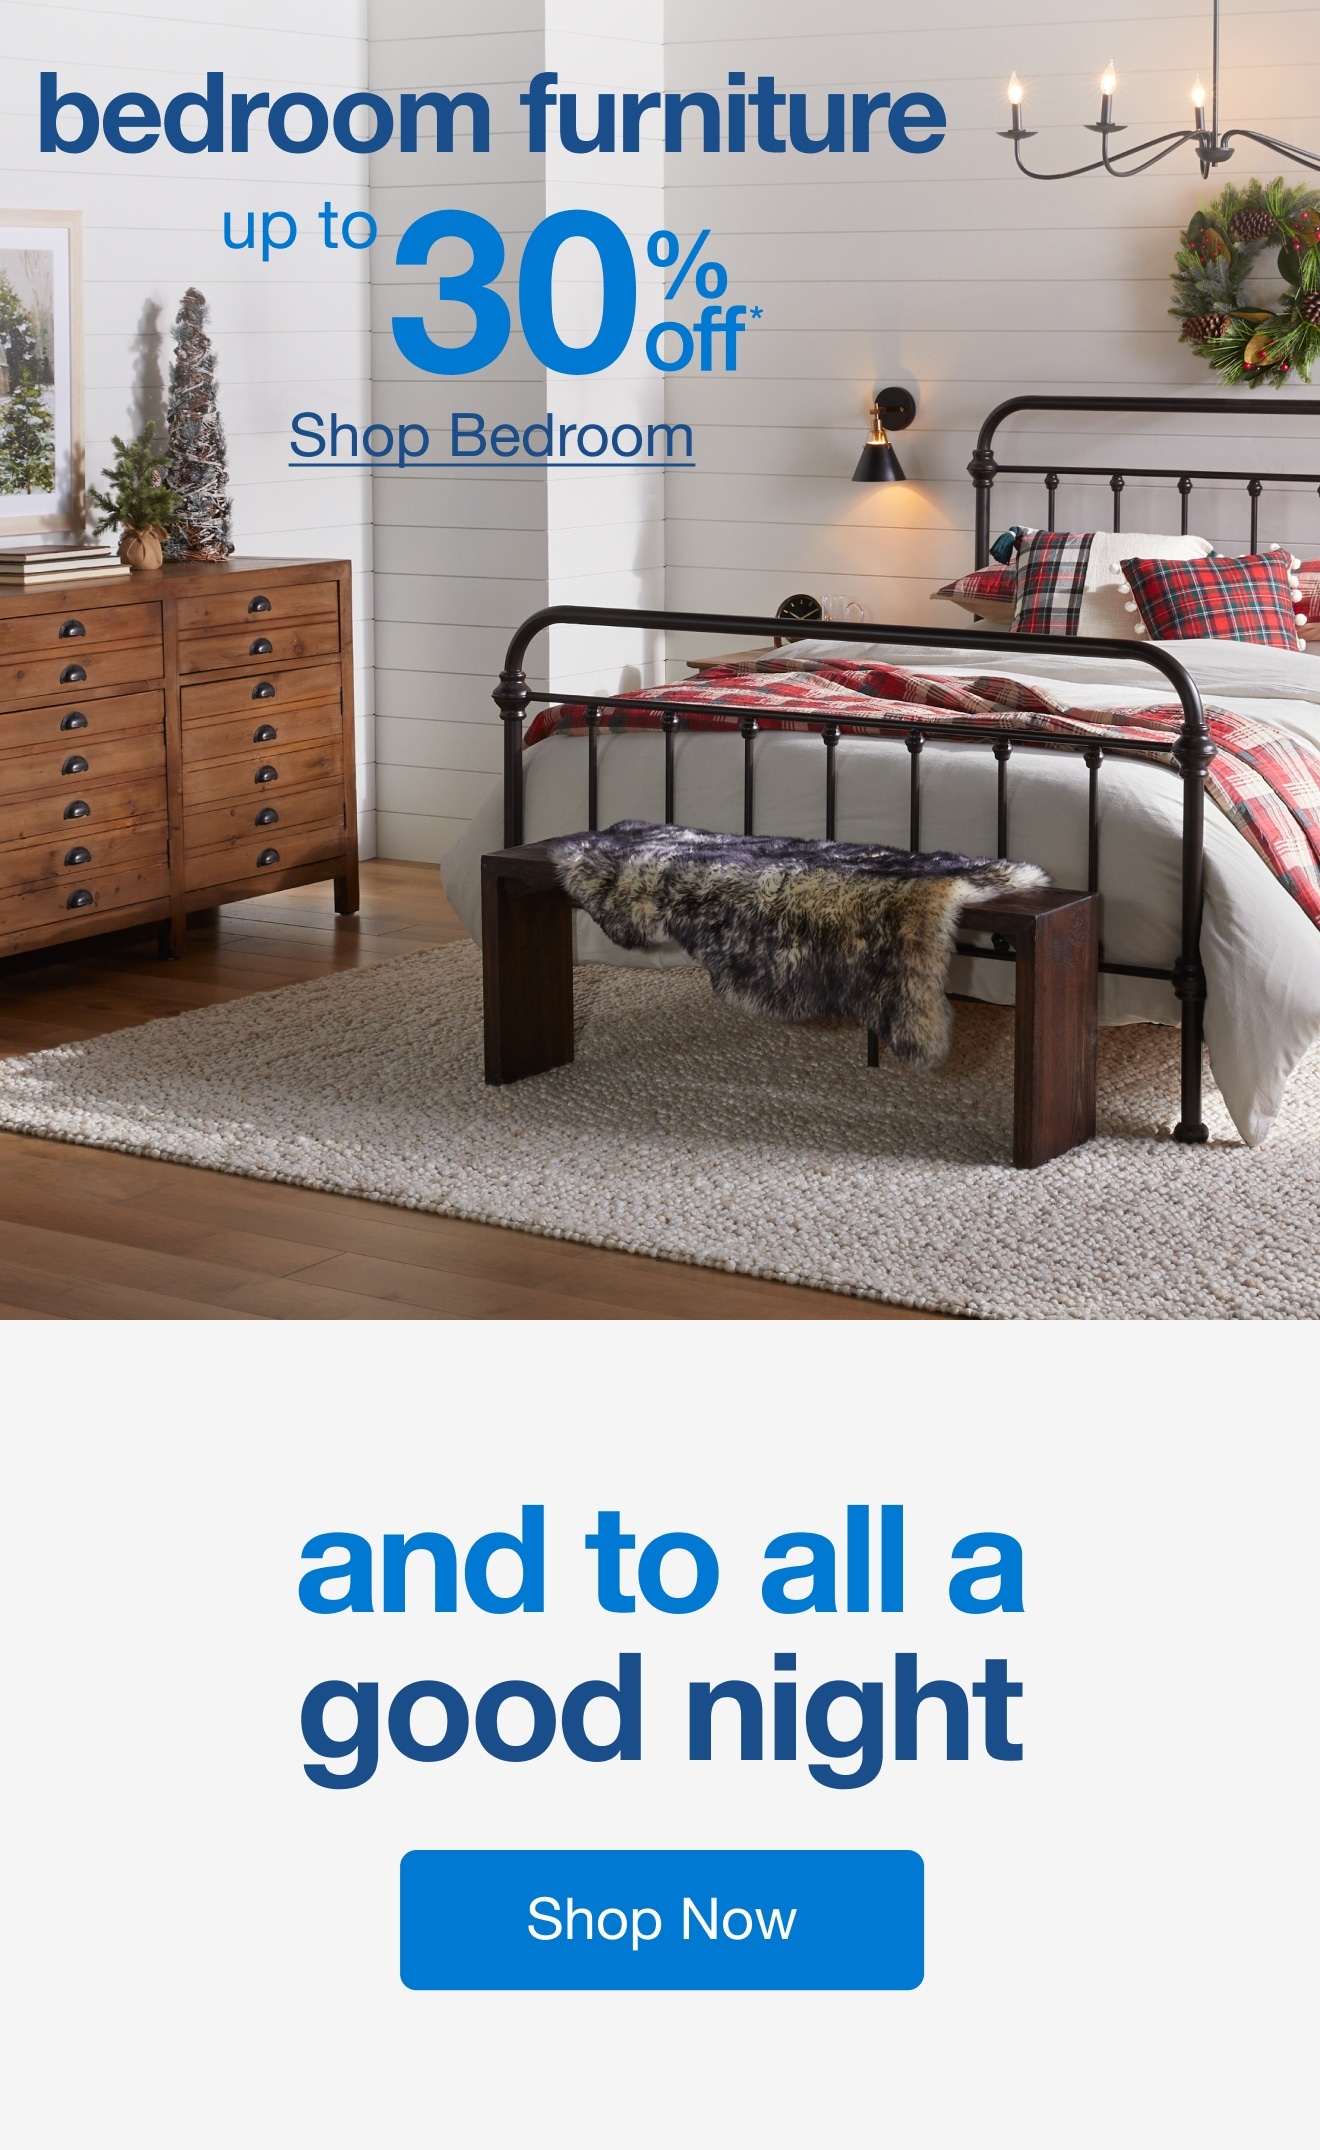 Bedroom Furniture Up To 30% Off* — Shop Now!